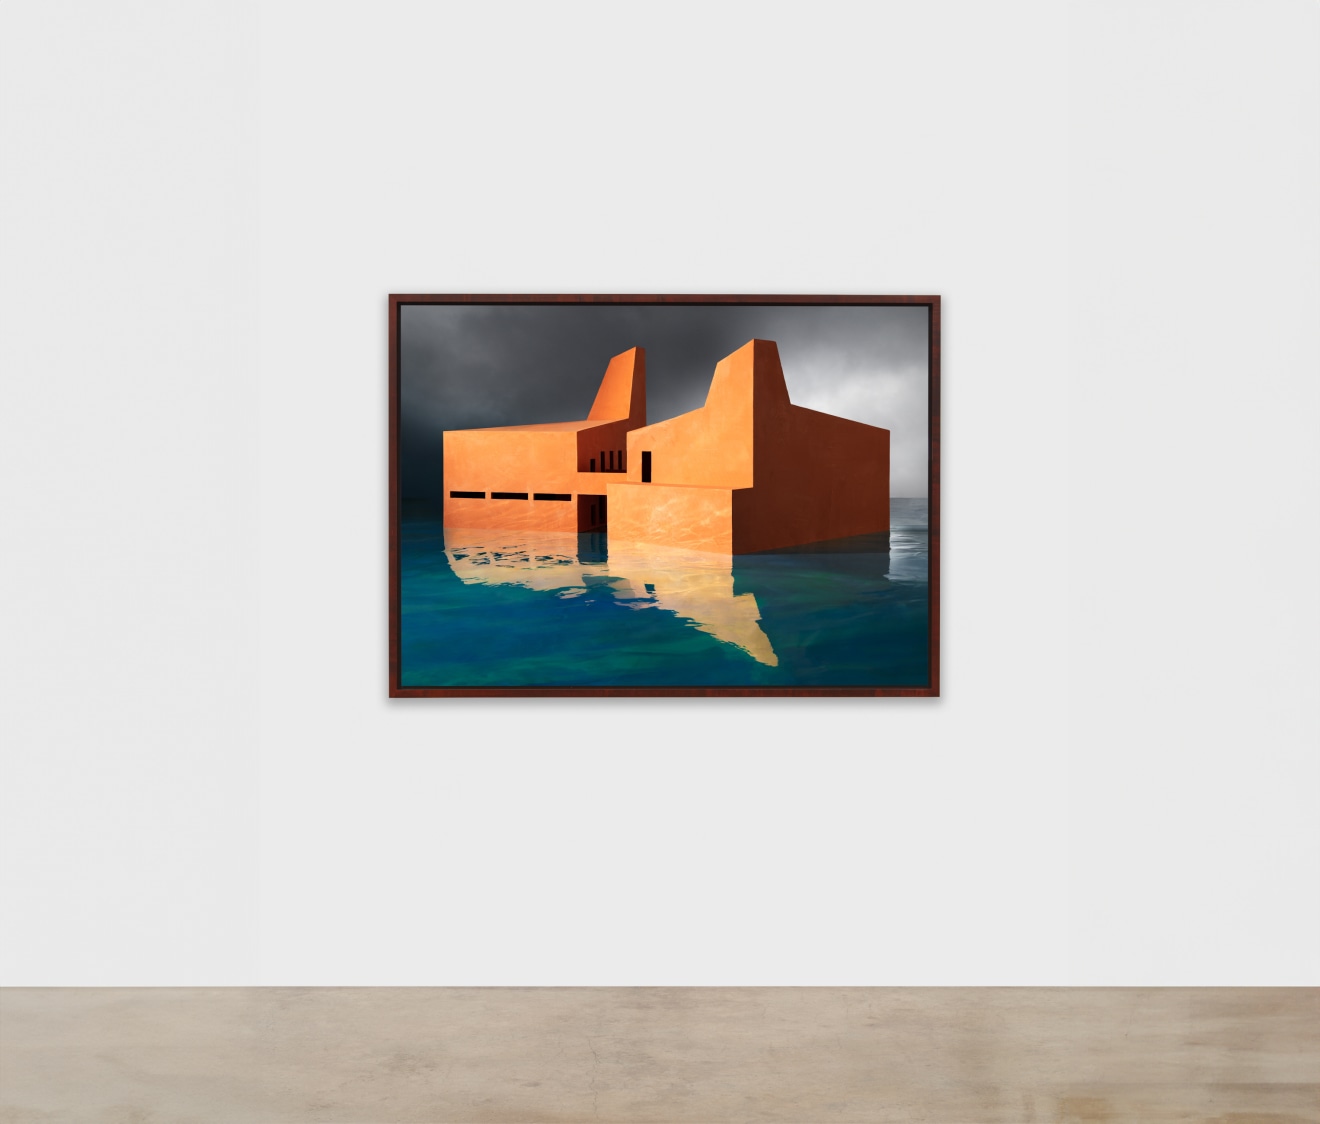 James Casebere,&nbsp;School, 2024, framed archival pigment print mounted to Dibond, paper: 46 3/4 x 65 1/8 inches, framed: 49 9/16 x 67 15/16 x 2 1/4 inches &copy; James&nbsp;Casebere Courtesy: the artist and Sean Kelly, New York/Los Angeles